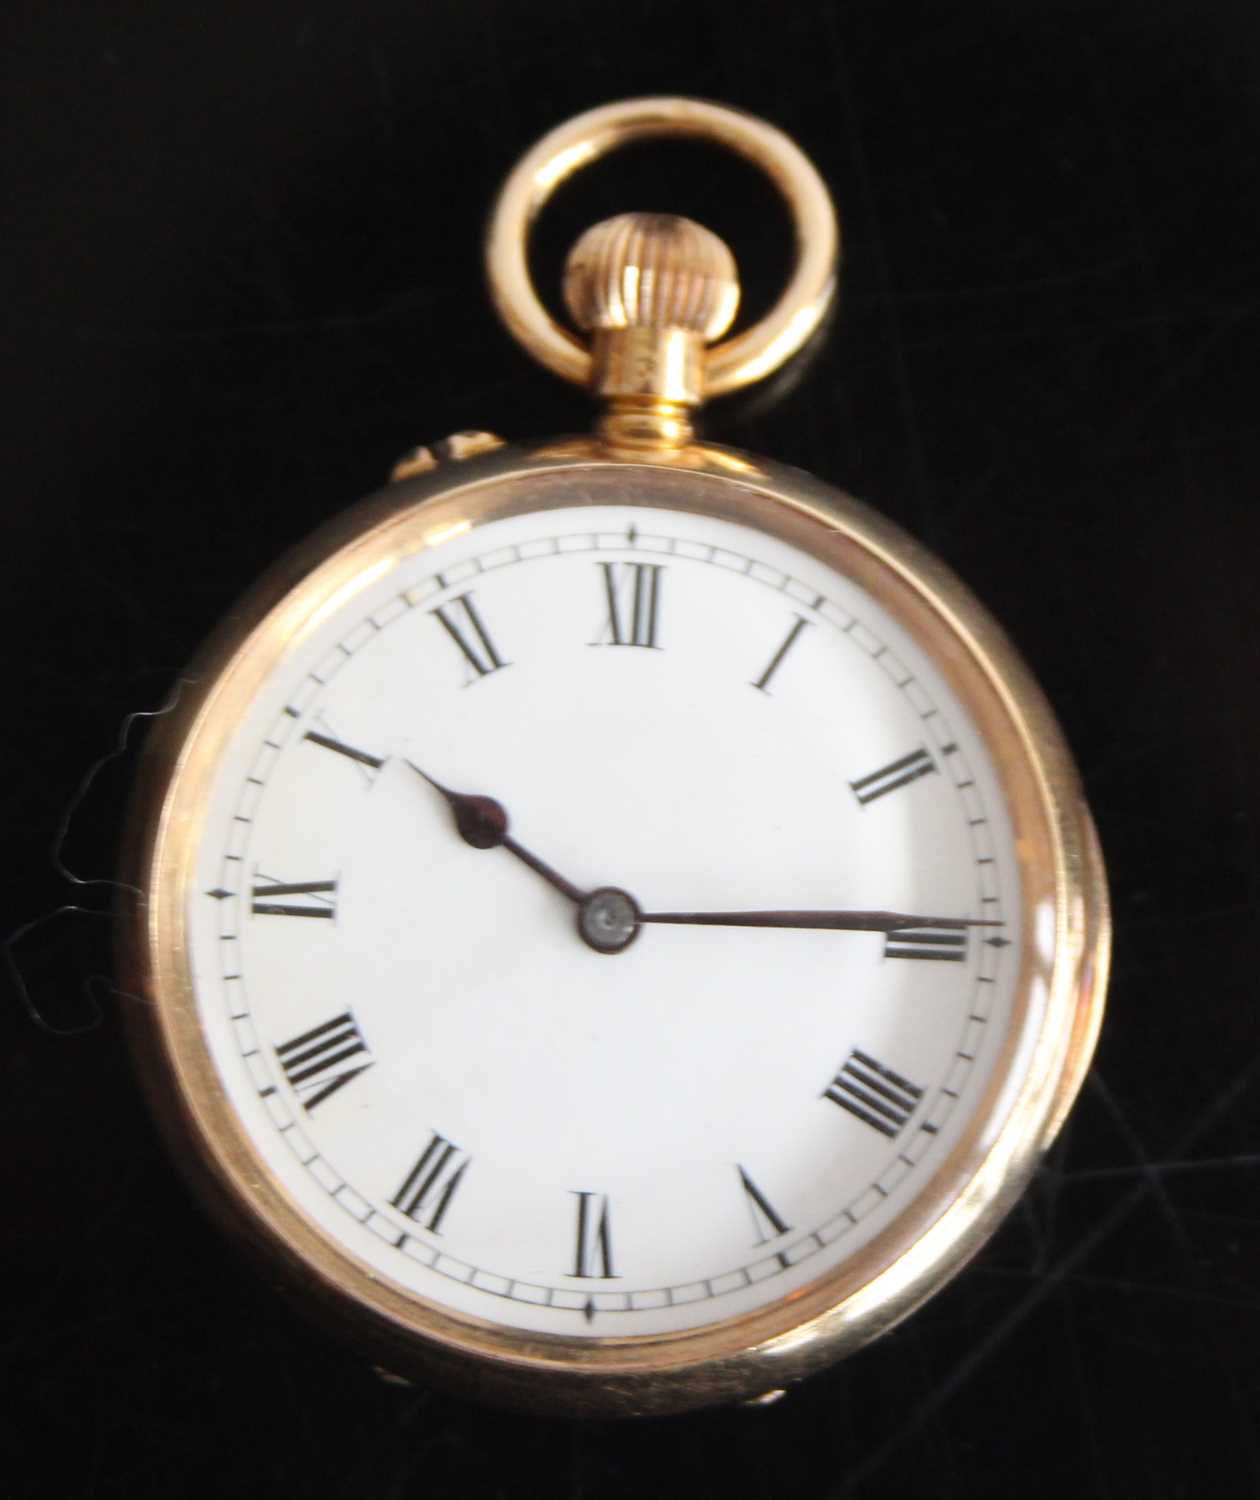 An 18ct gold keyless open faced pocket watch with round white Roman dial and case back engraved with